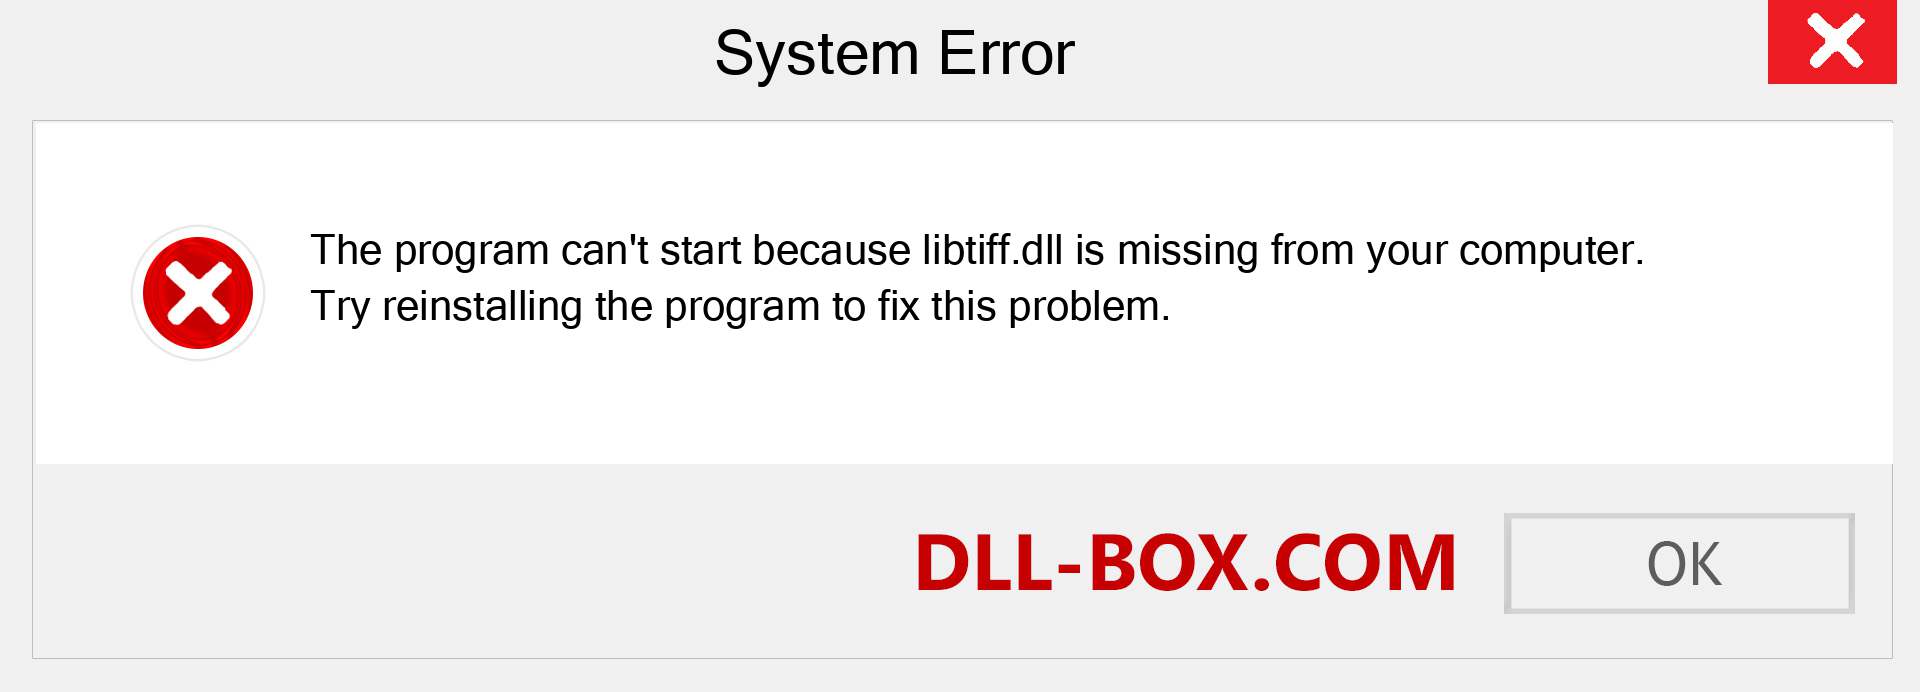  libtiff.dll file is missing?. Download for Windows 7, 8, 10 - Fix  libtiff dll Missing Error on Windows, photos, images